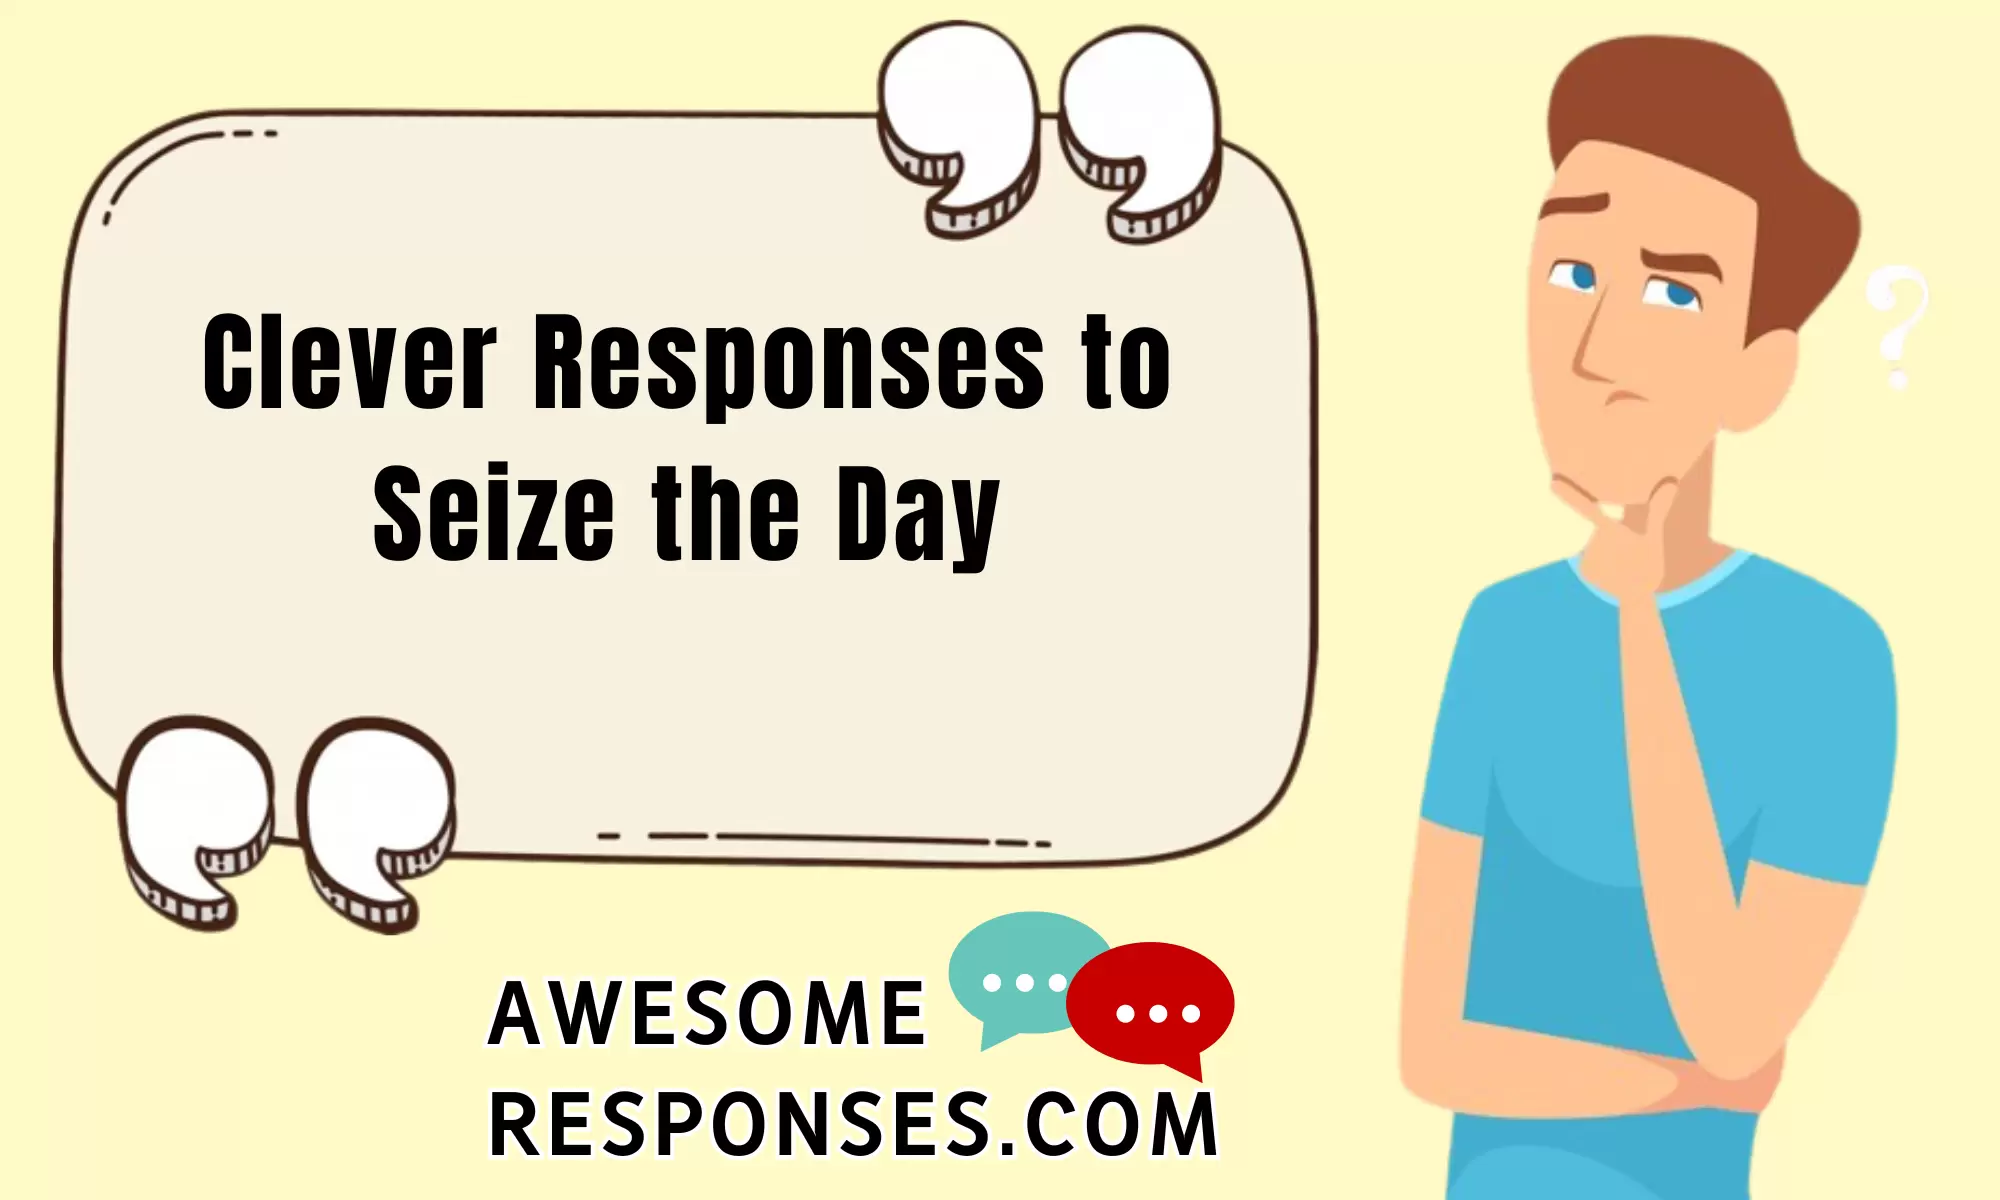 Clever Responses to Seize the Day